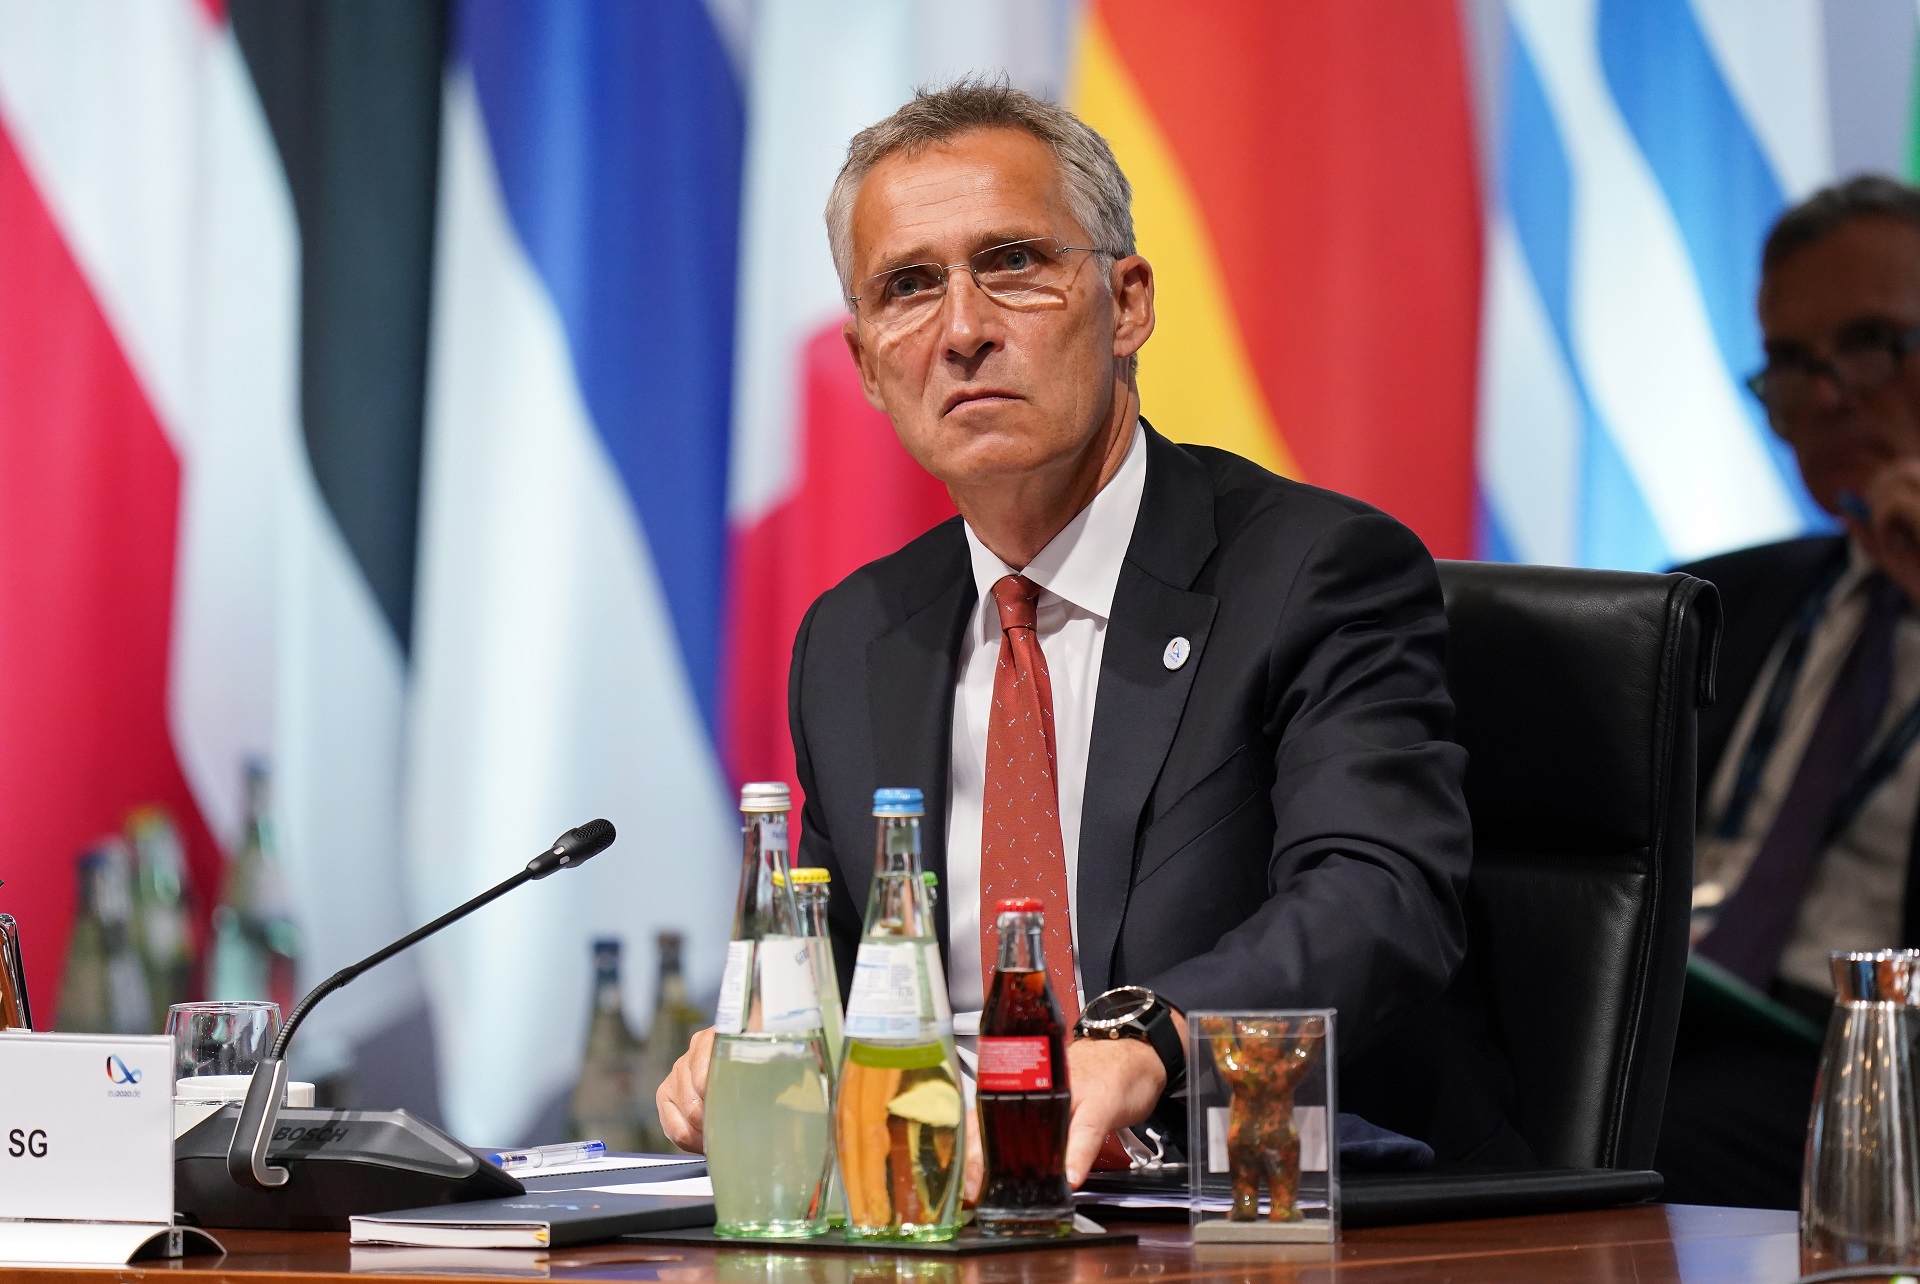 epa08626596 NATO Secretary General Jens Stoltenberg attends a meeting of European Union member states defence ministers, in Berlin, Germany, 26 August 2020. The meeting, which is taking place as part of Germany's head of the rotating presidency of the European Council, is the first such meeting taking place with participants in person since begin of the coronavirus pandemic.  EPA/SEAN GALLUP / POOL